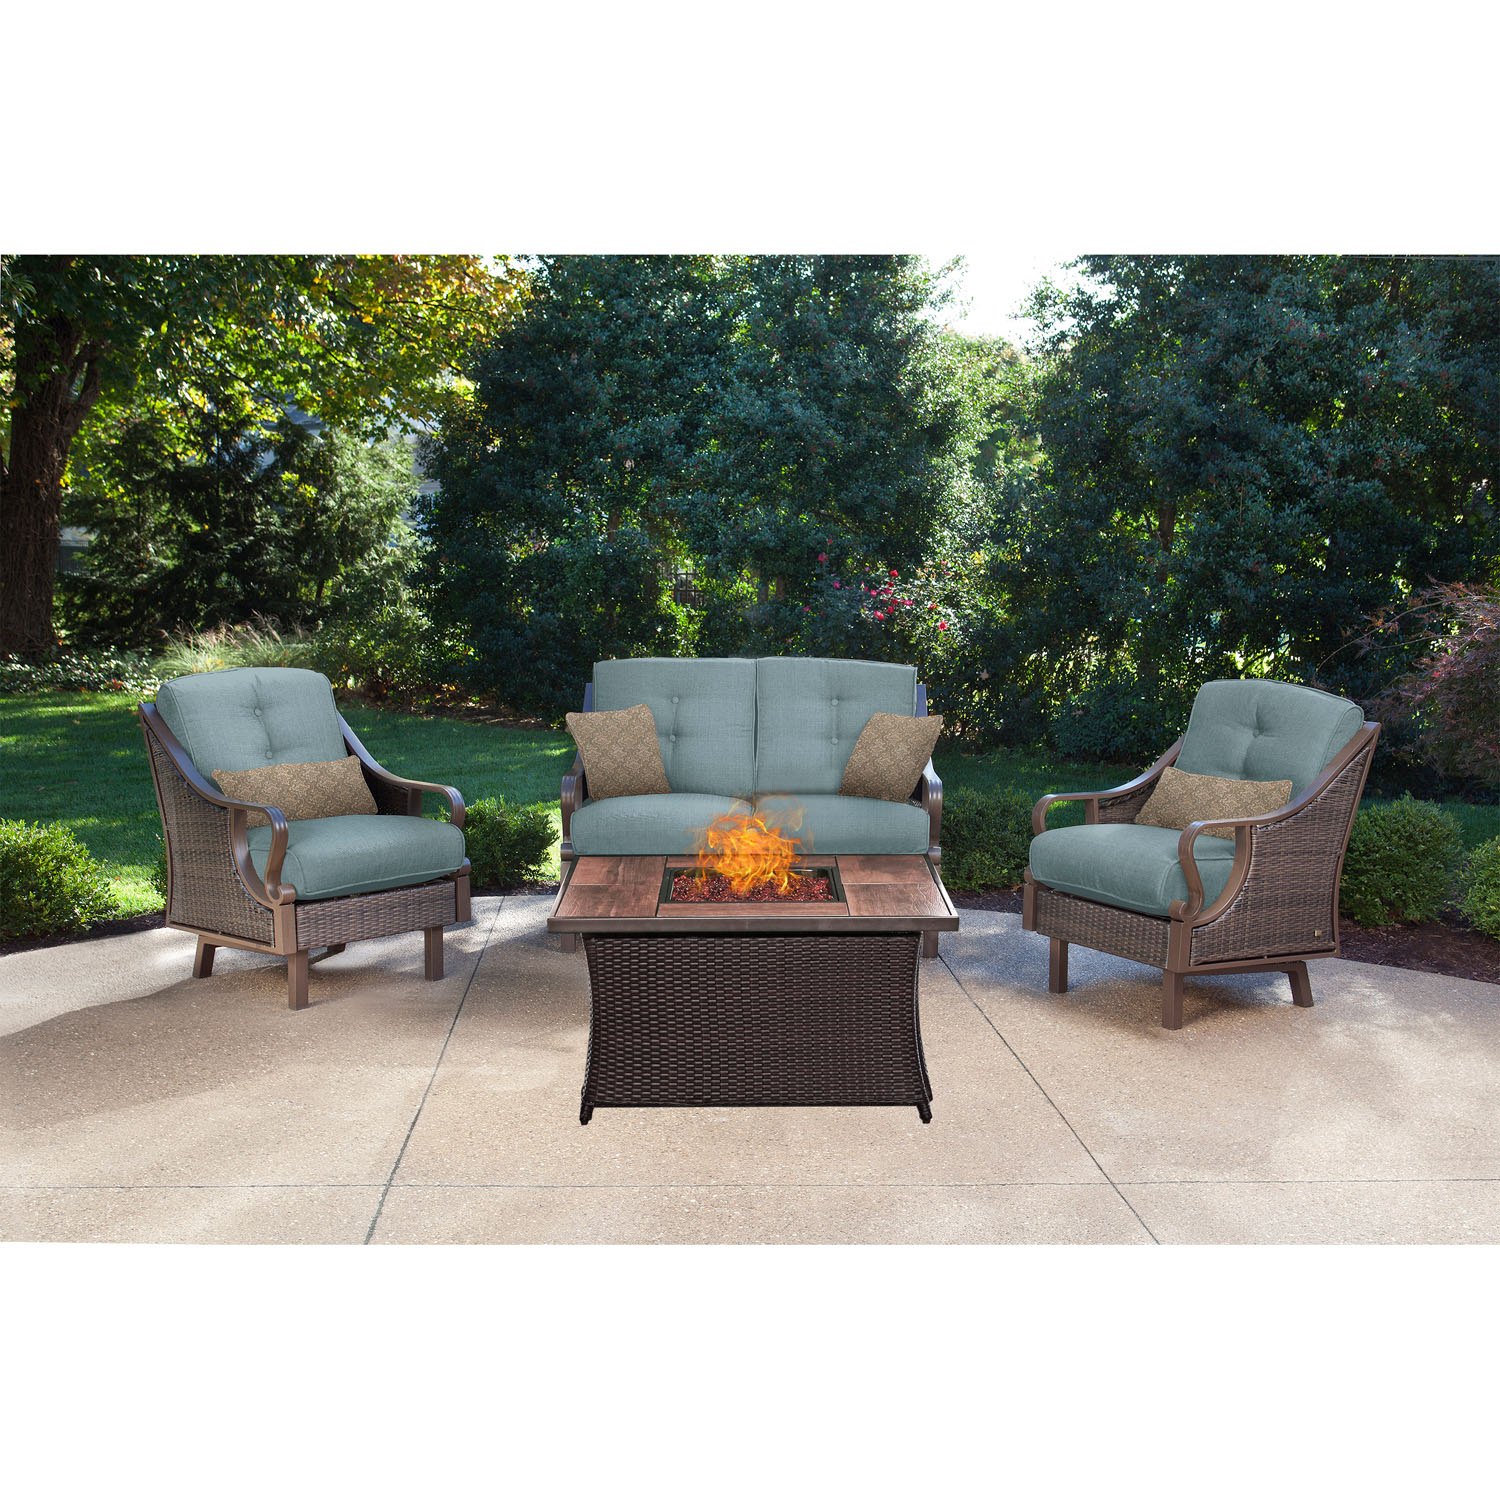 Hanover Ventura 4 Pcs Wicker and Steel Propane Fire Pit Chat Set, Ocean Blue - image 1 of 12